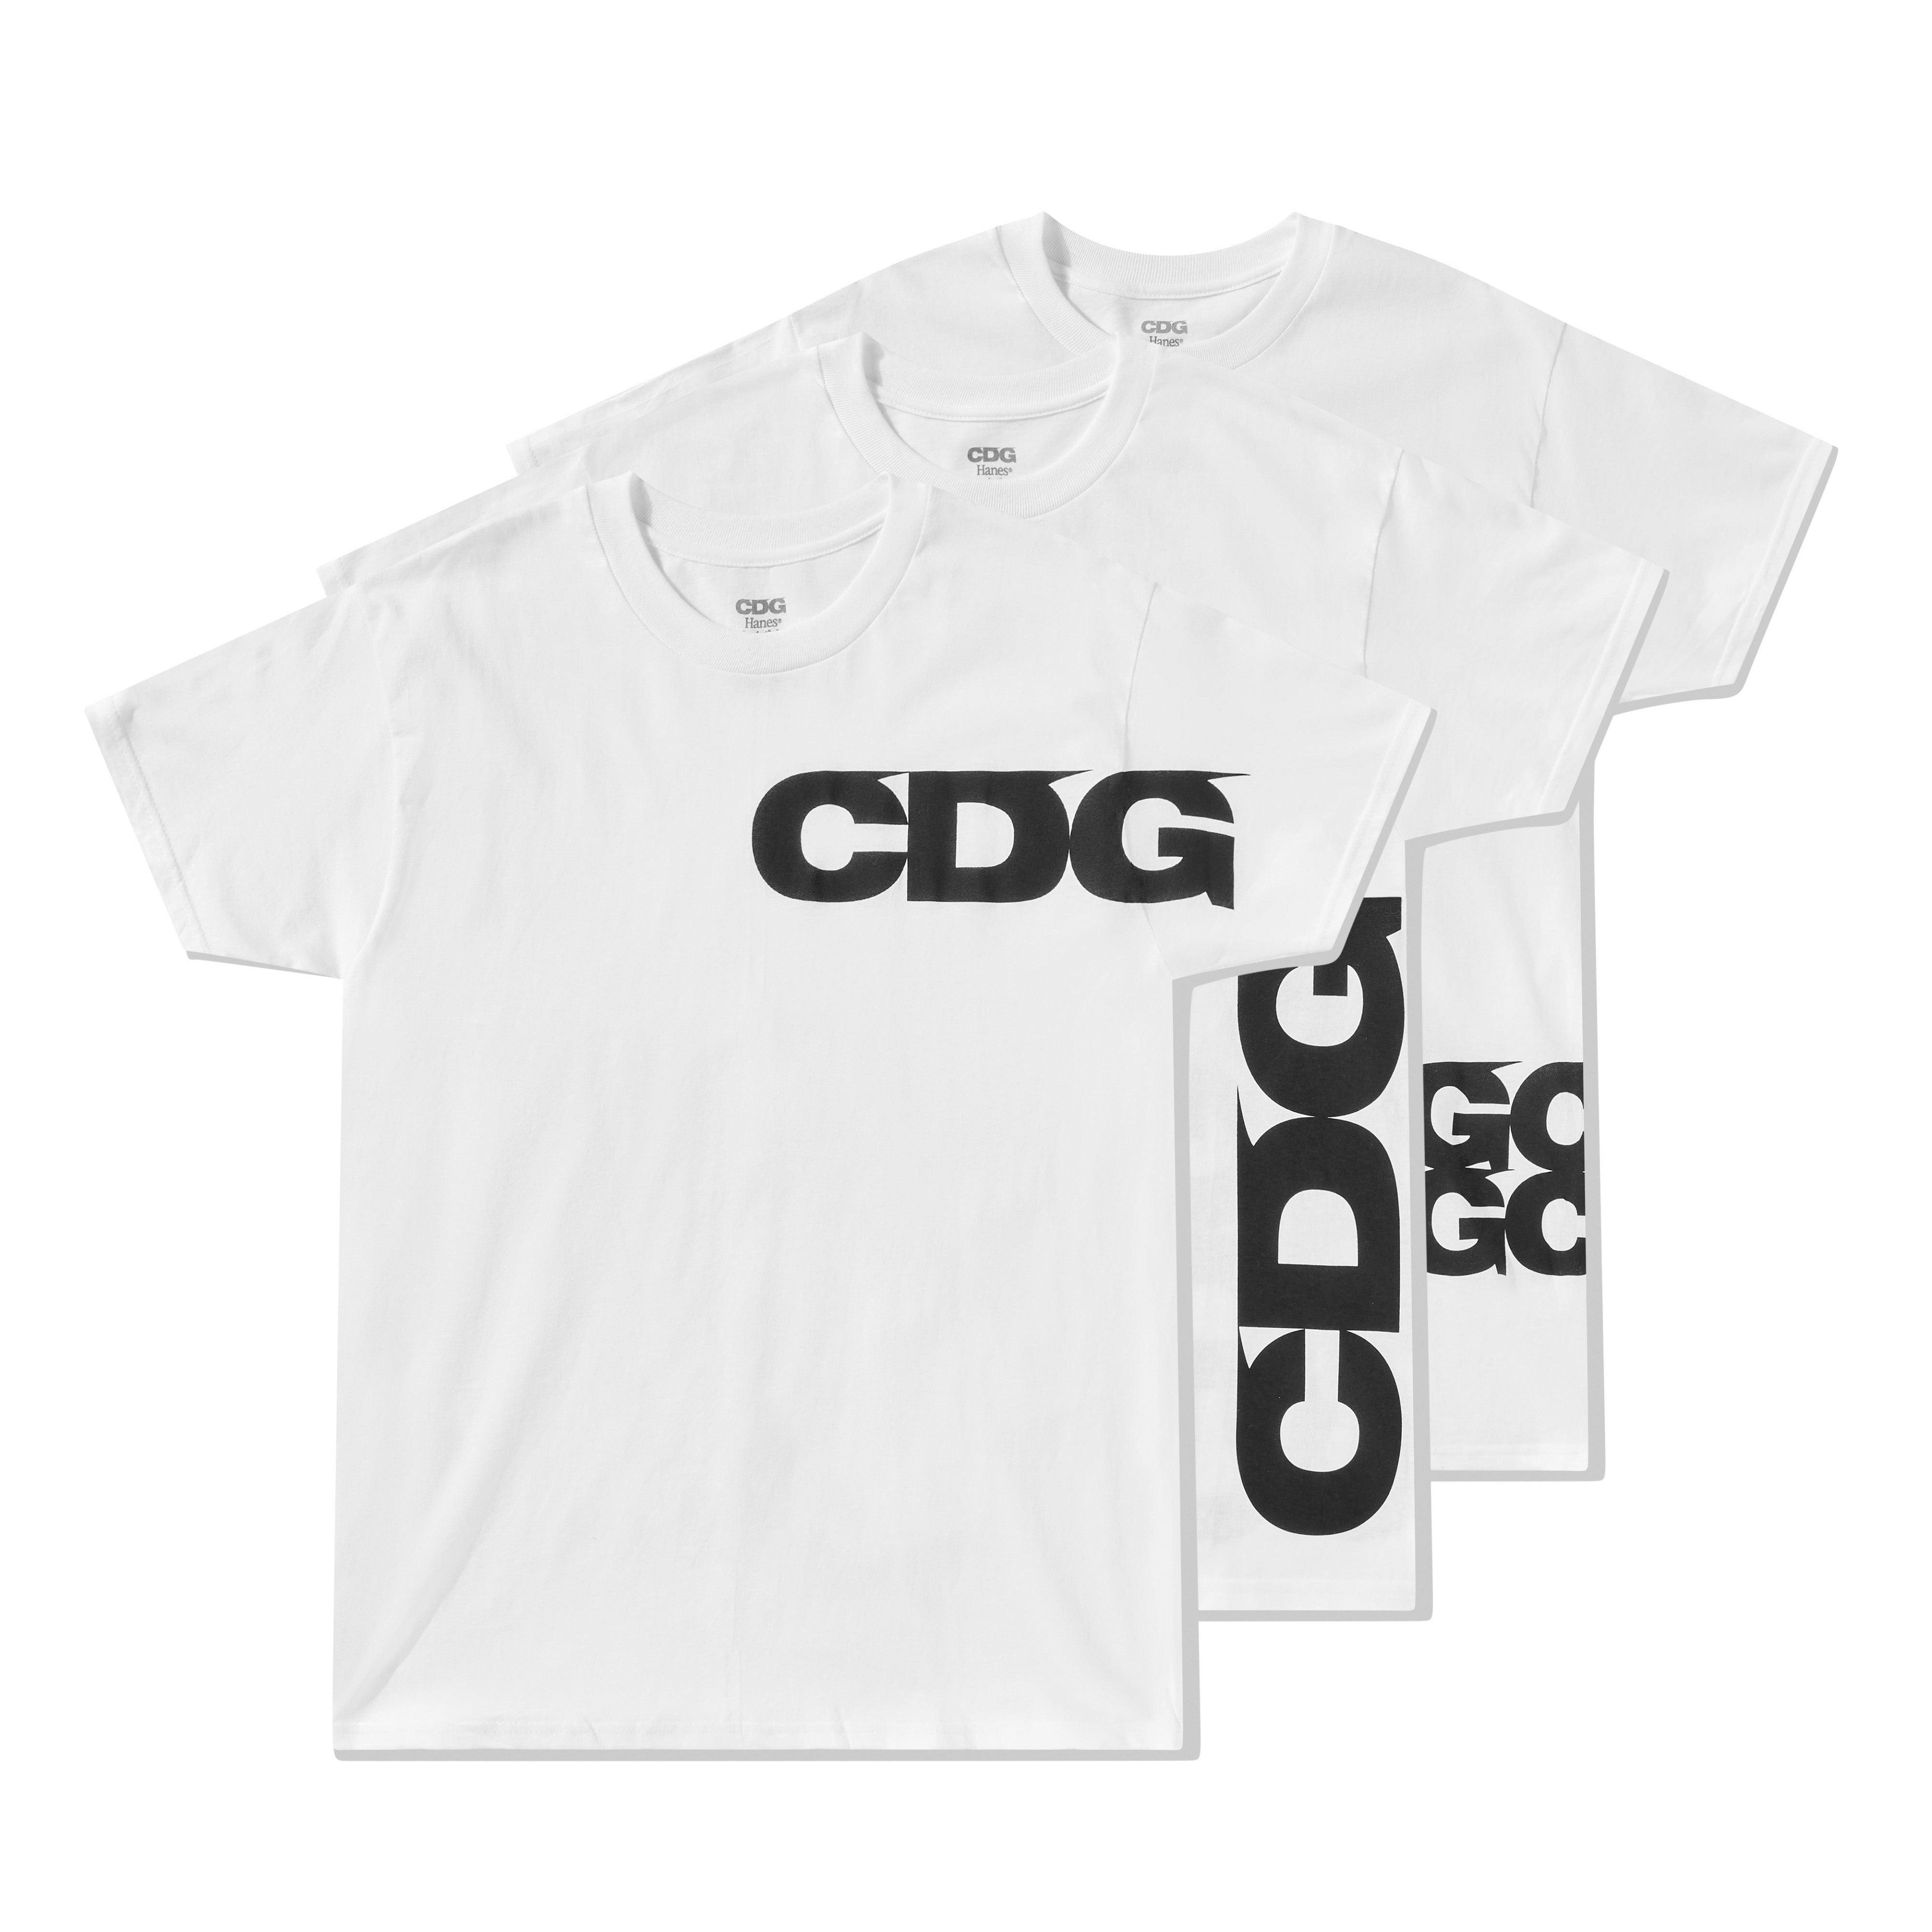 CDG - Hanes 3-Pack T-Shirt Set - (White) by COMME DES GARCONS